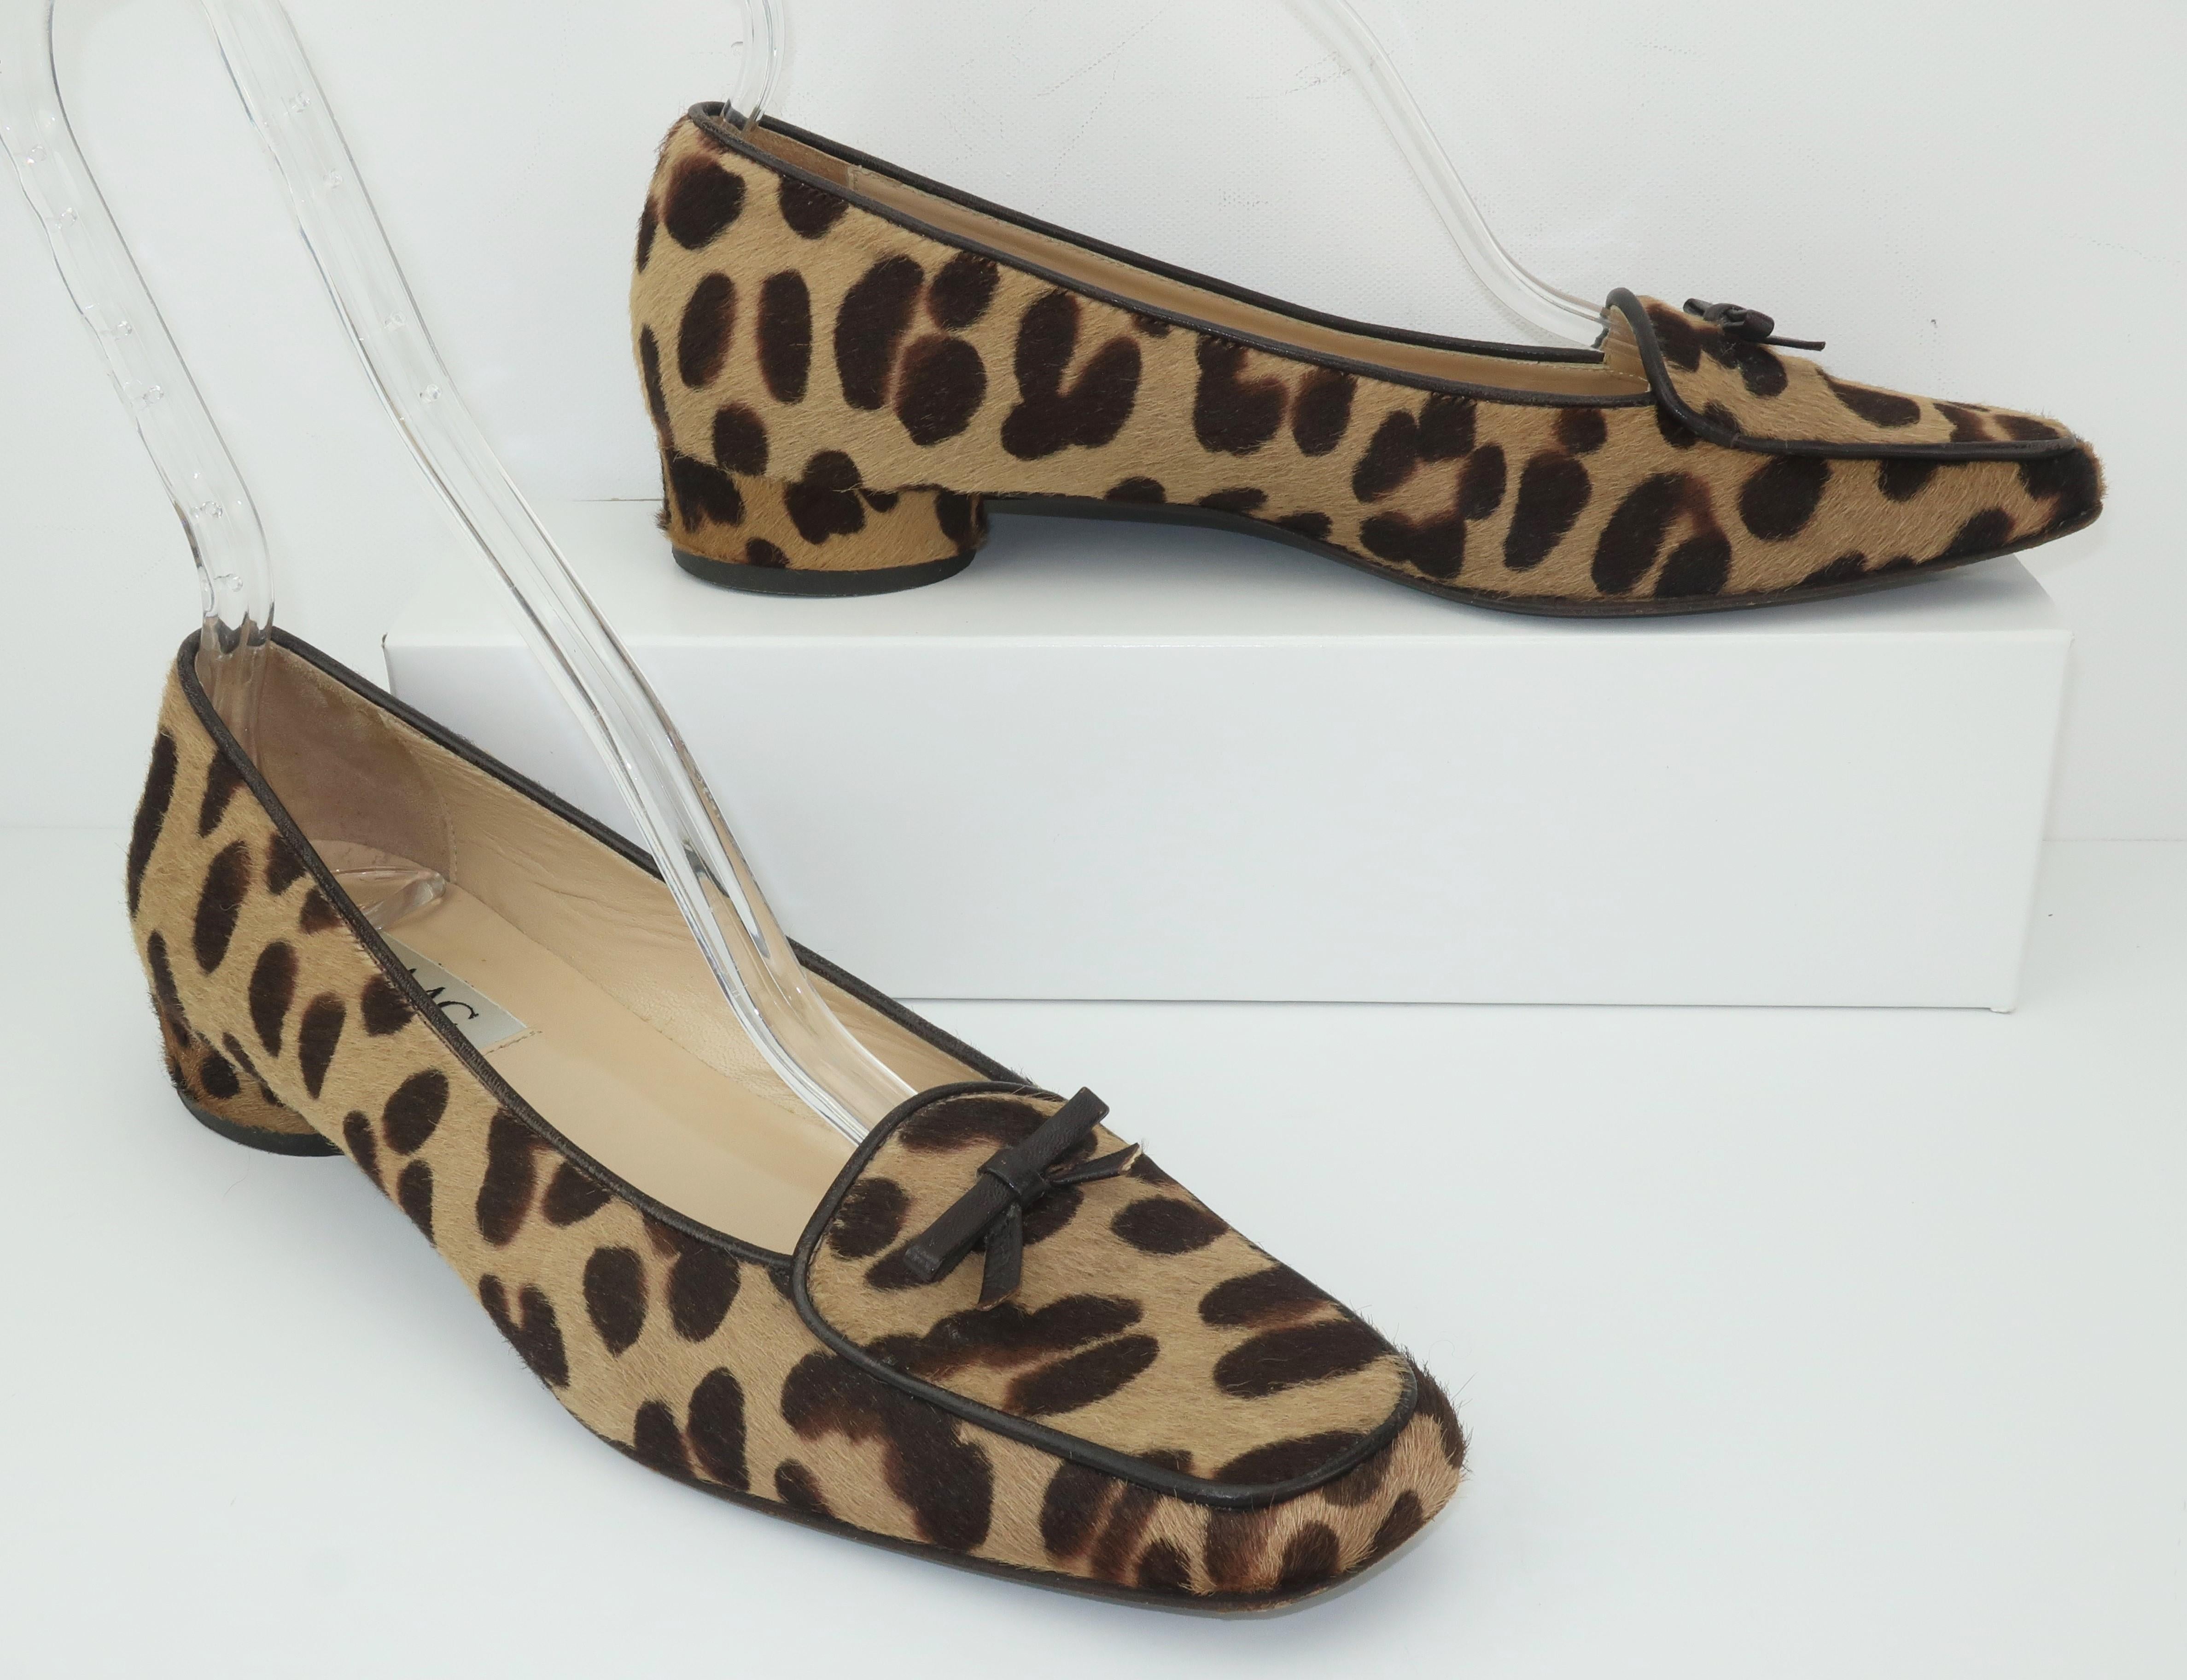 Isaac Mizrahi's take on the classic loafer includes an animal printed flat fur, brown leather bow detail and an elongated toe ... not to mention an adorable cylinder shaped heel!   Made in Italy and marked a size 7 1/2 M with light wear to leather